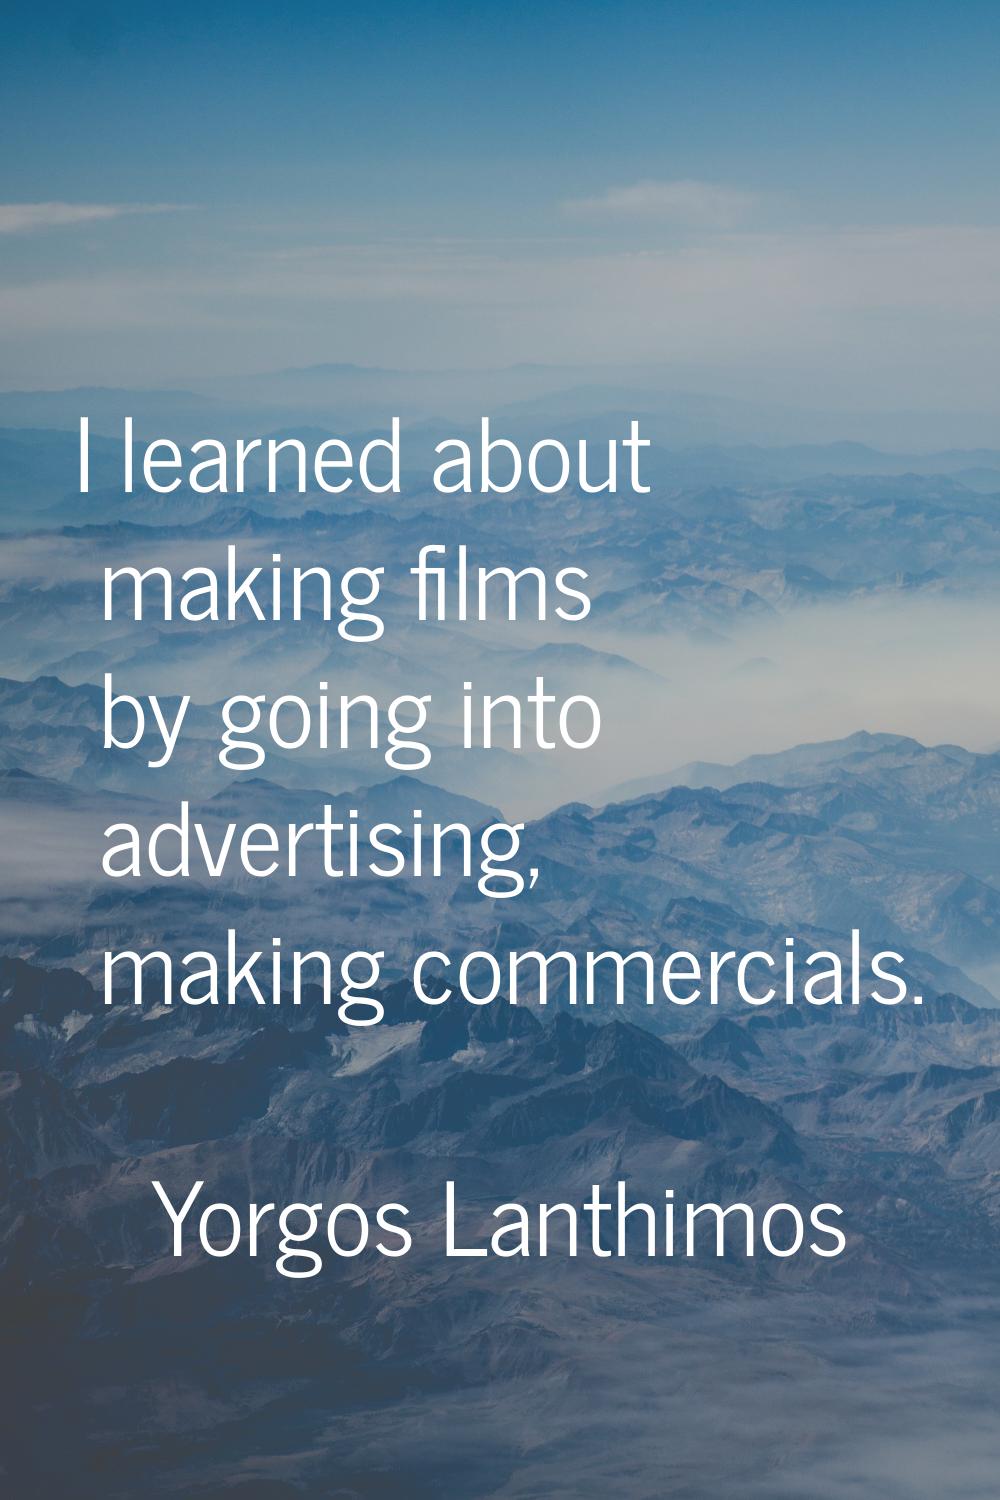 I learned about making films by going into advertising, making commercials.